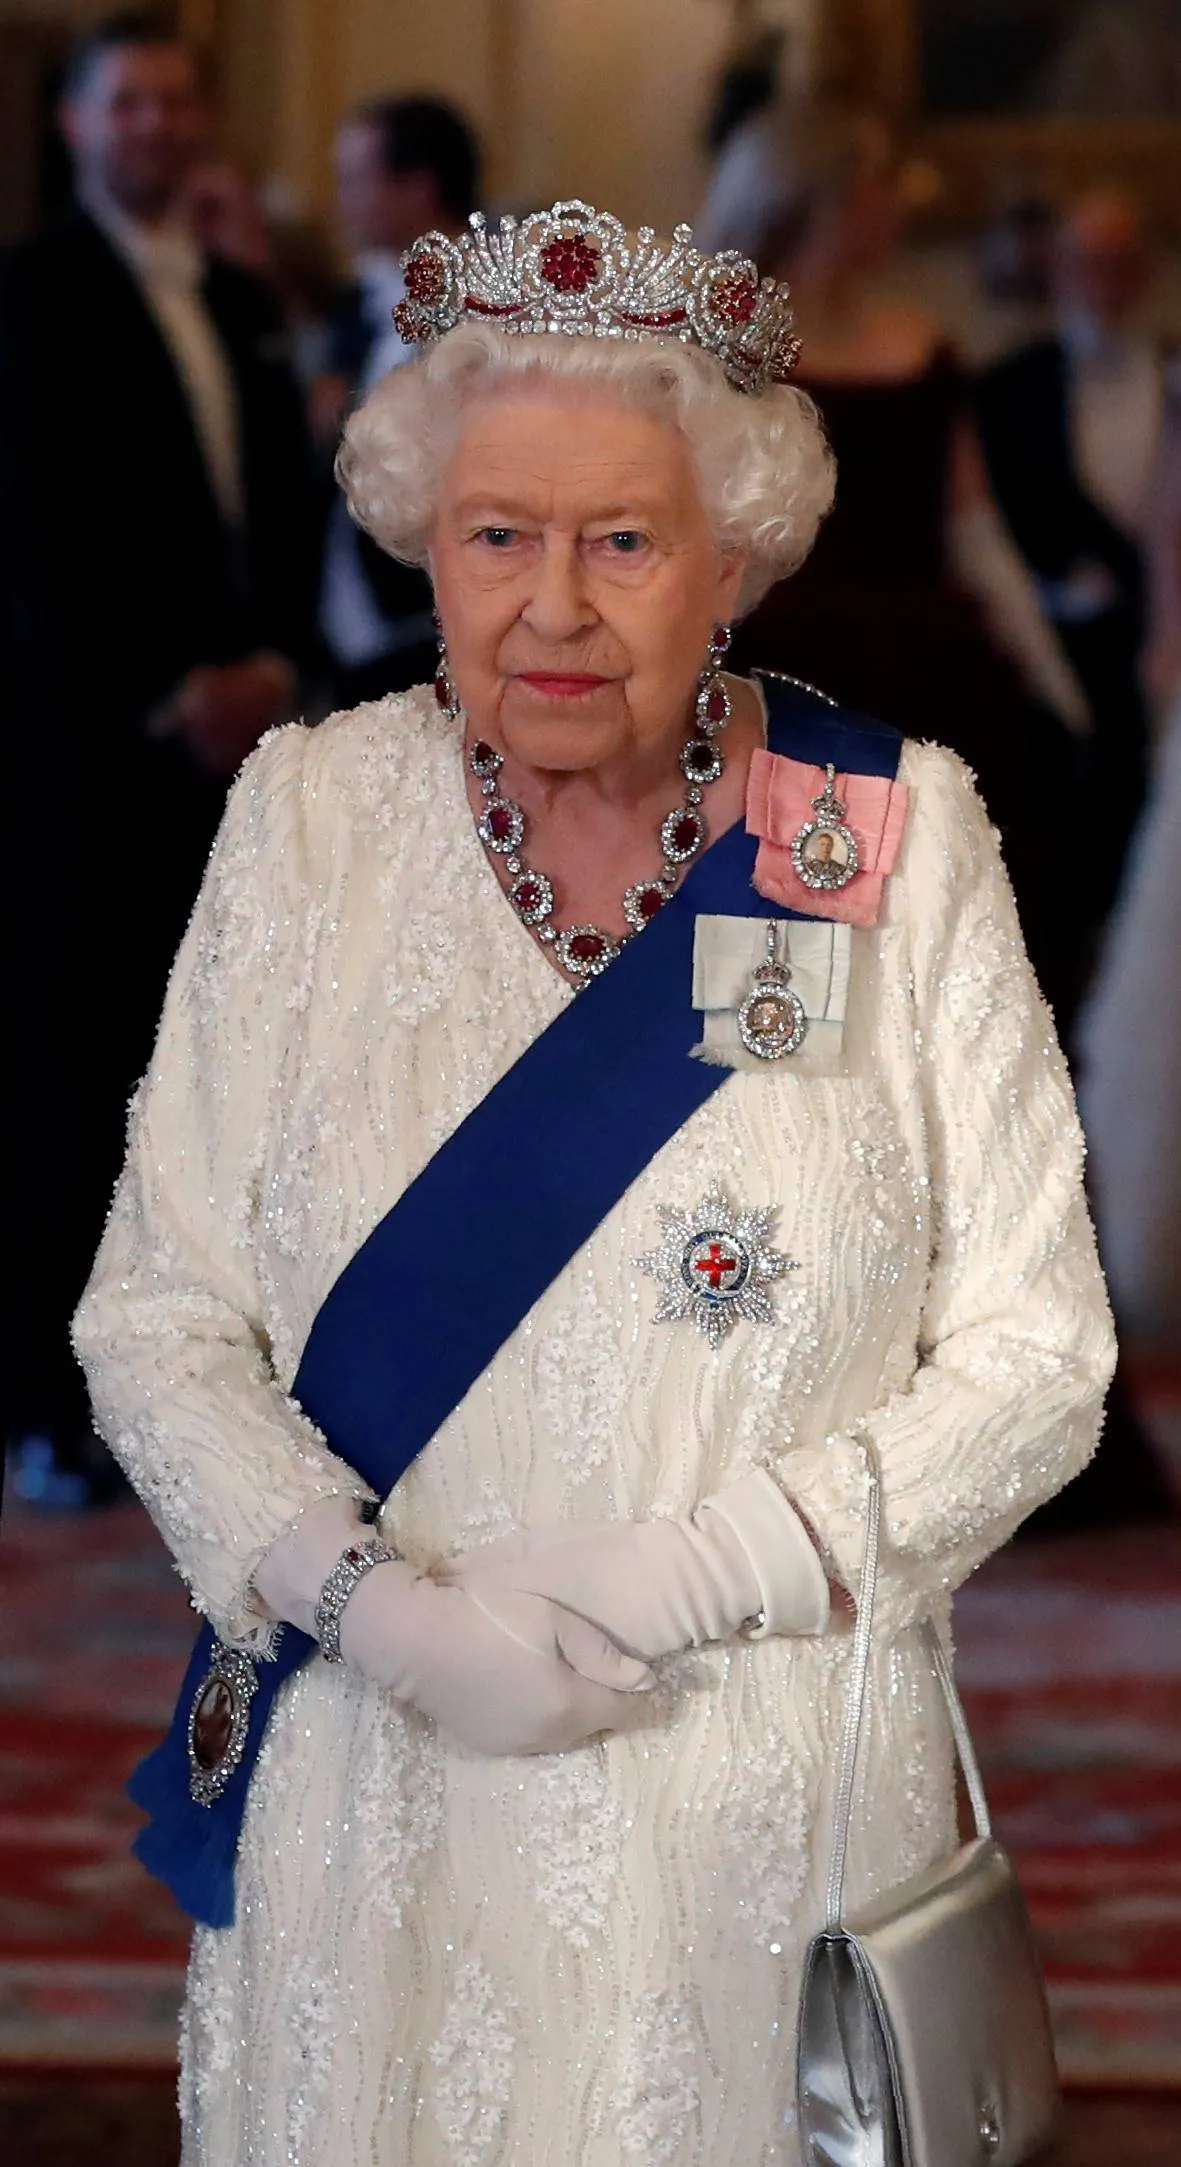 The Queen's Ruby Tiara Has A Hidden Meaning